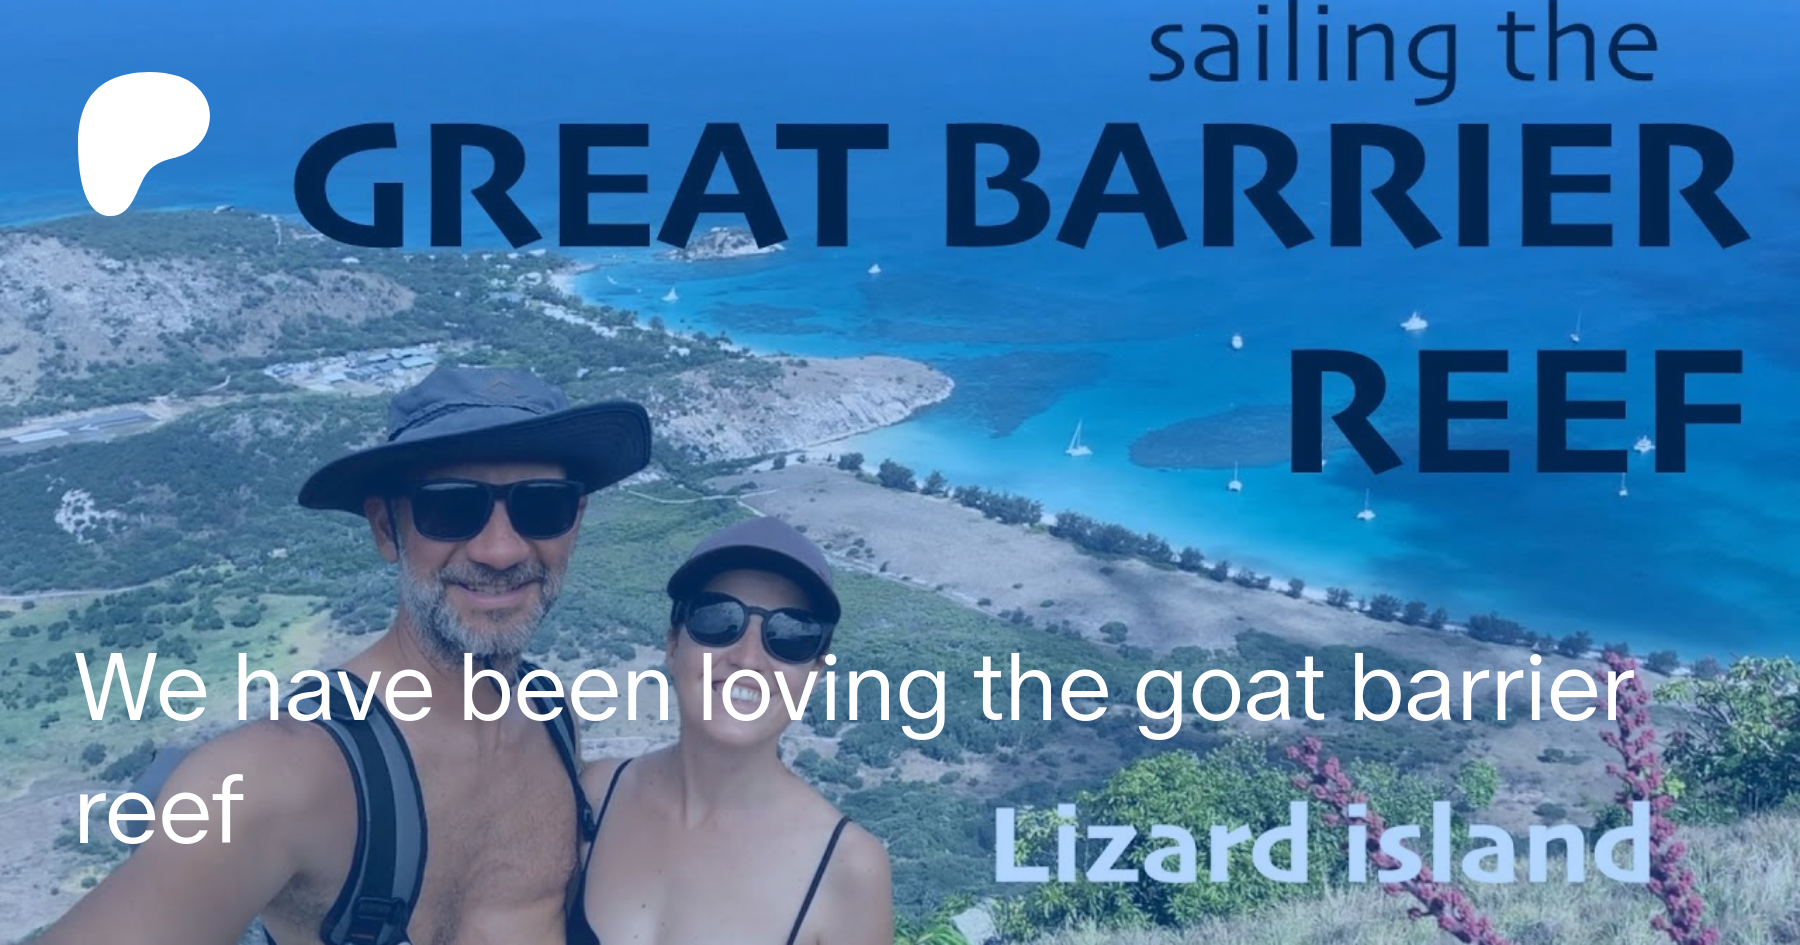 We have been loving the goat barrier reef